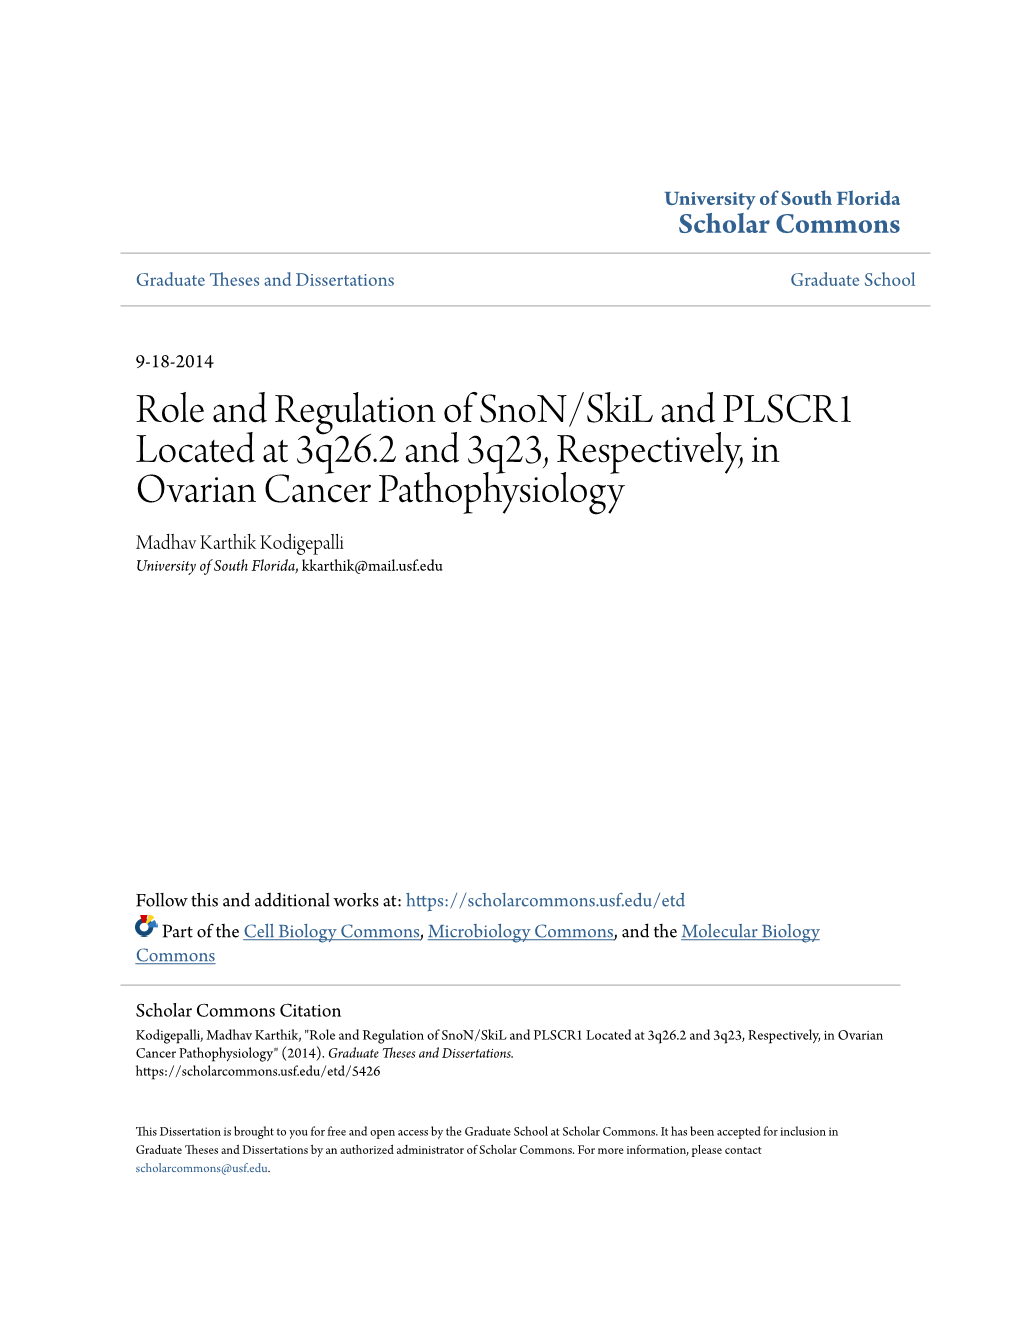 Role and Regulation of Snon/Skil and PLSCR1 Located at 3Q26.2